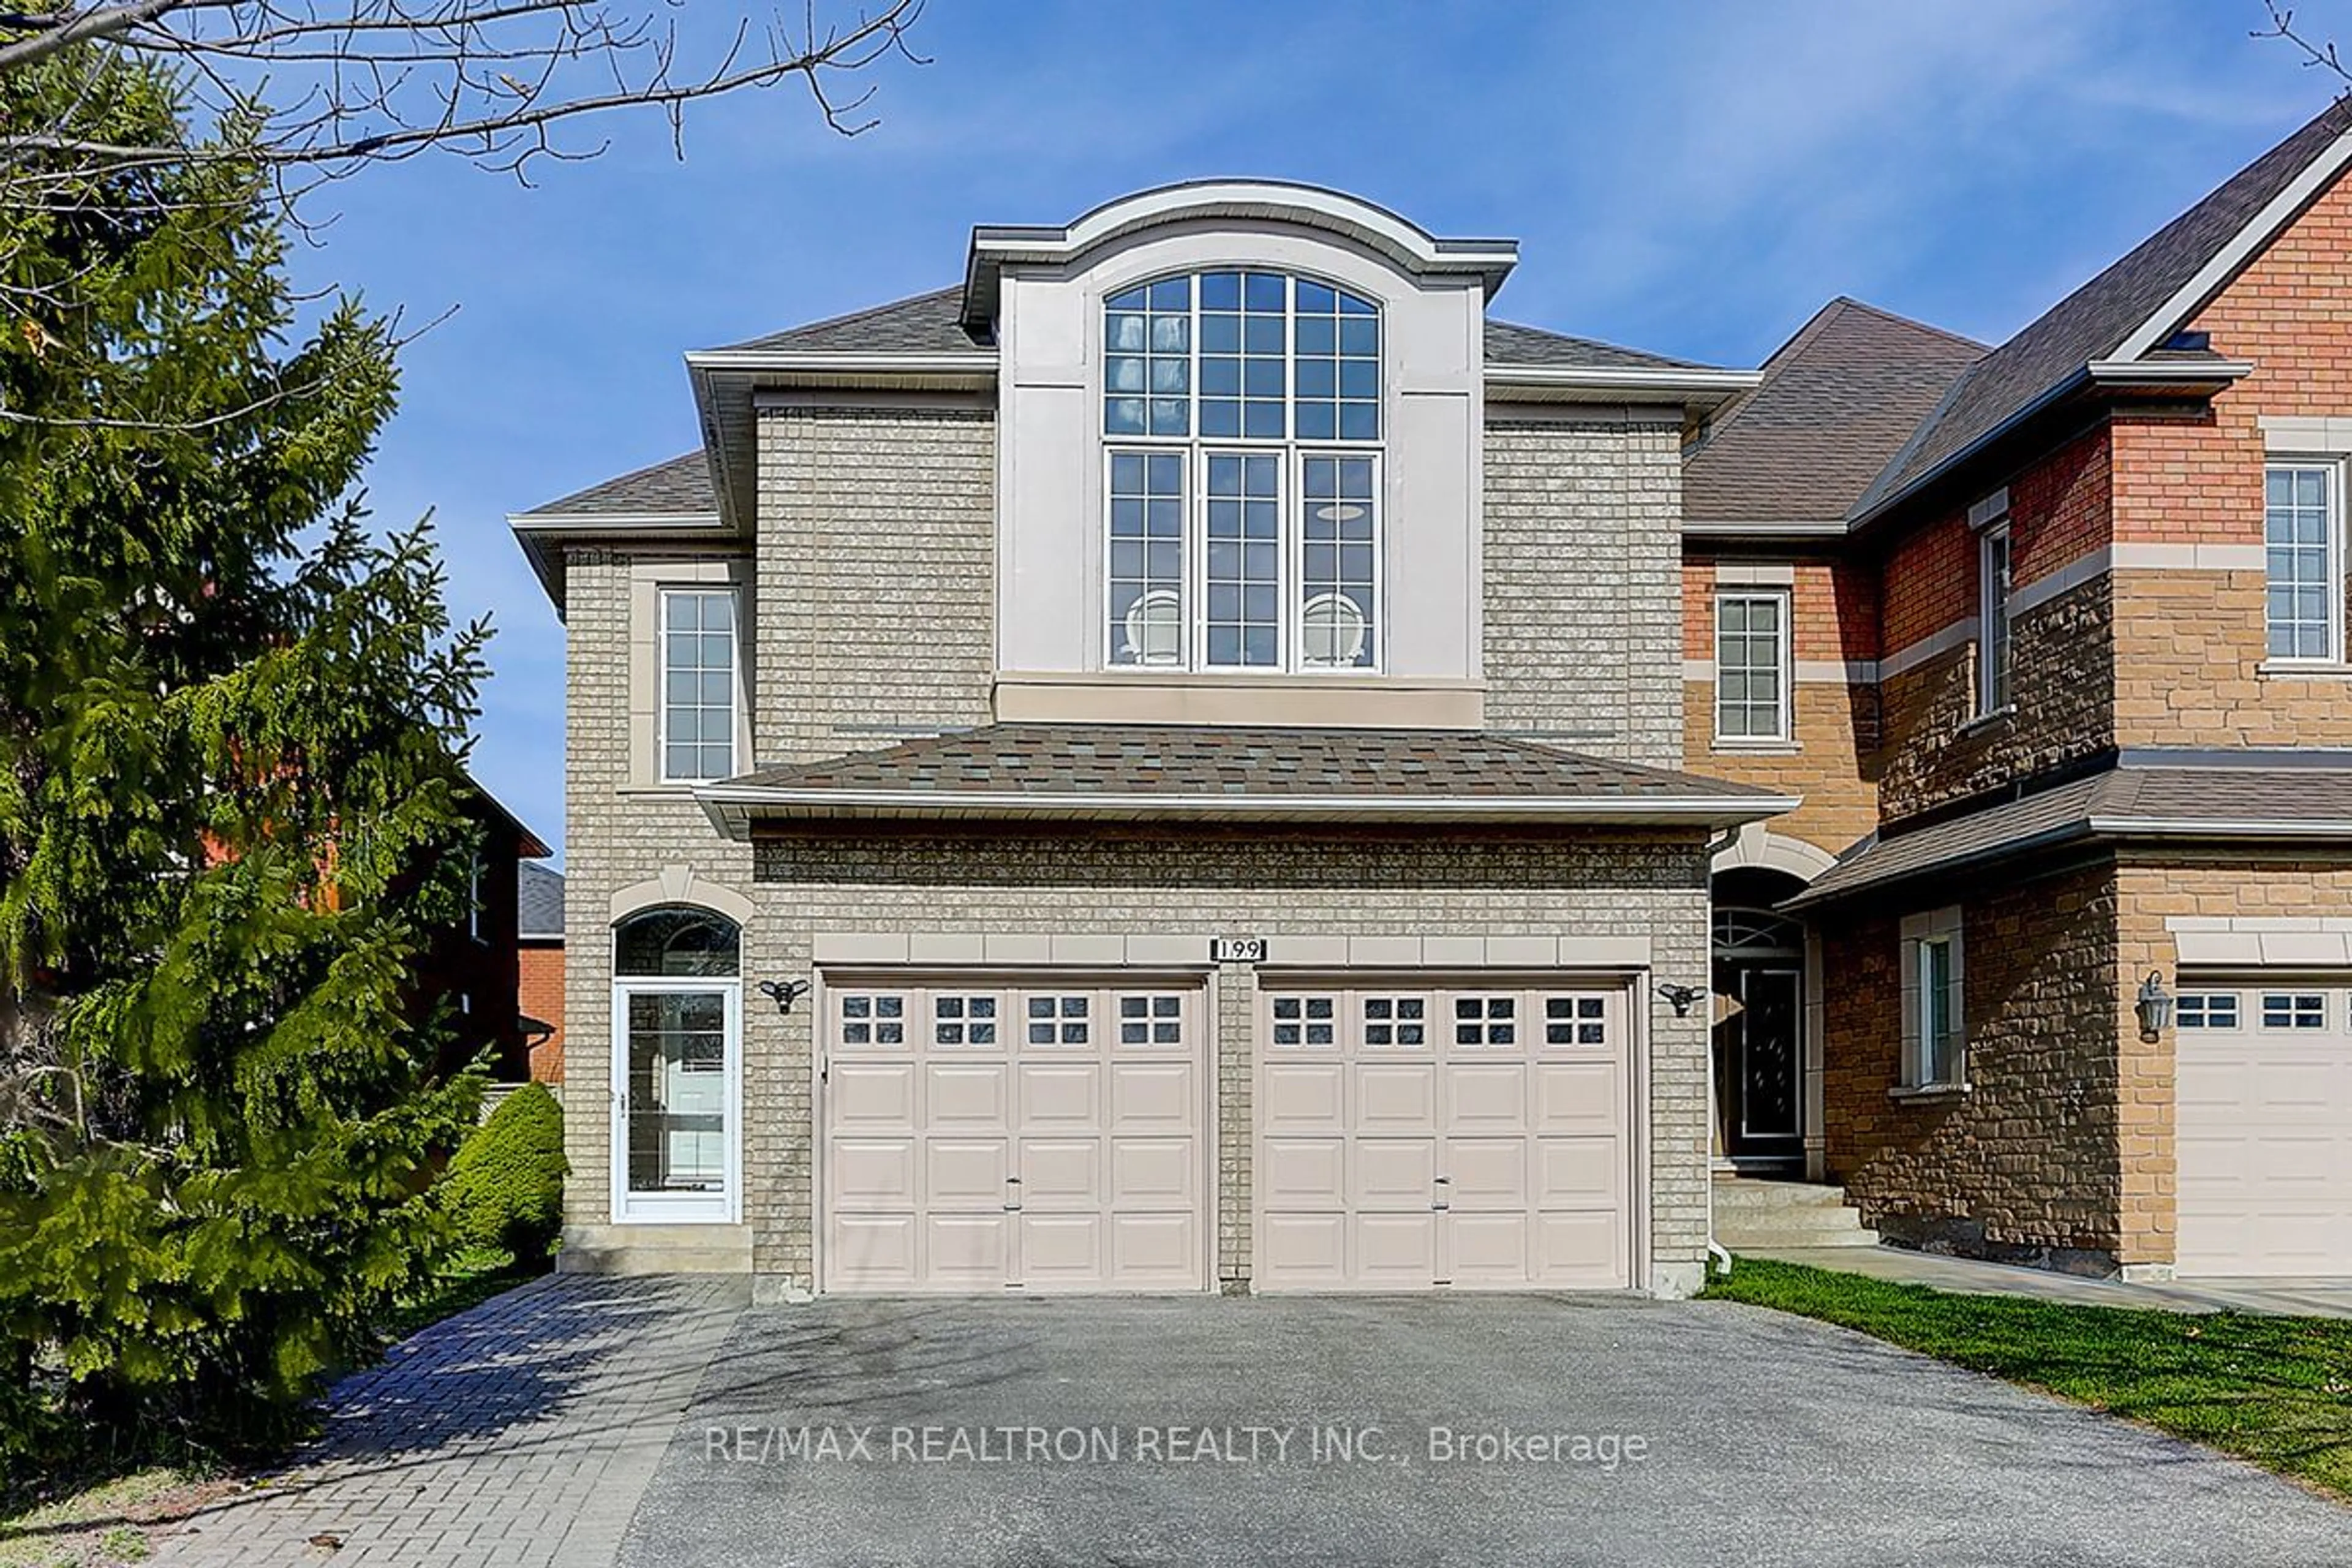 Home with brick exterior material for 199 Frank Endean Rd, Richmond Hill Ontario L4S 1S4